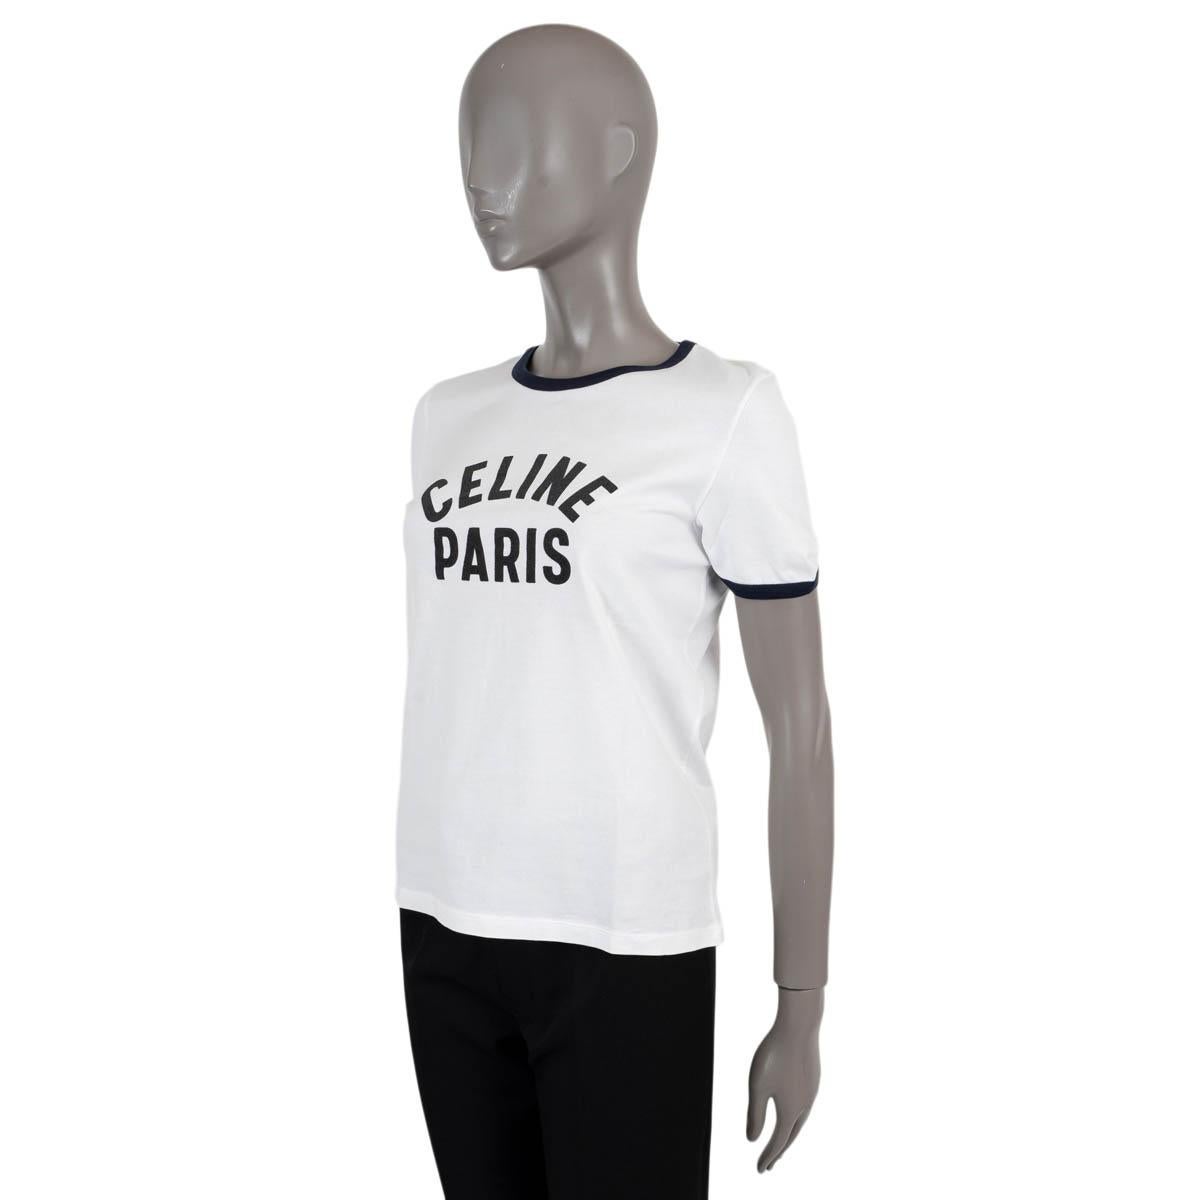 100% authentic Celine Paris 70’s t-shirt in white cotton (100%). Features a Celine Paris print in black. Has been worn and is in excellent condition.

Measurements
Model	2X655501F
Tag Size	M
Size	M
Shoulder Width	38cm (14.8in)
Bust From	92cm